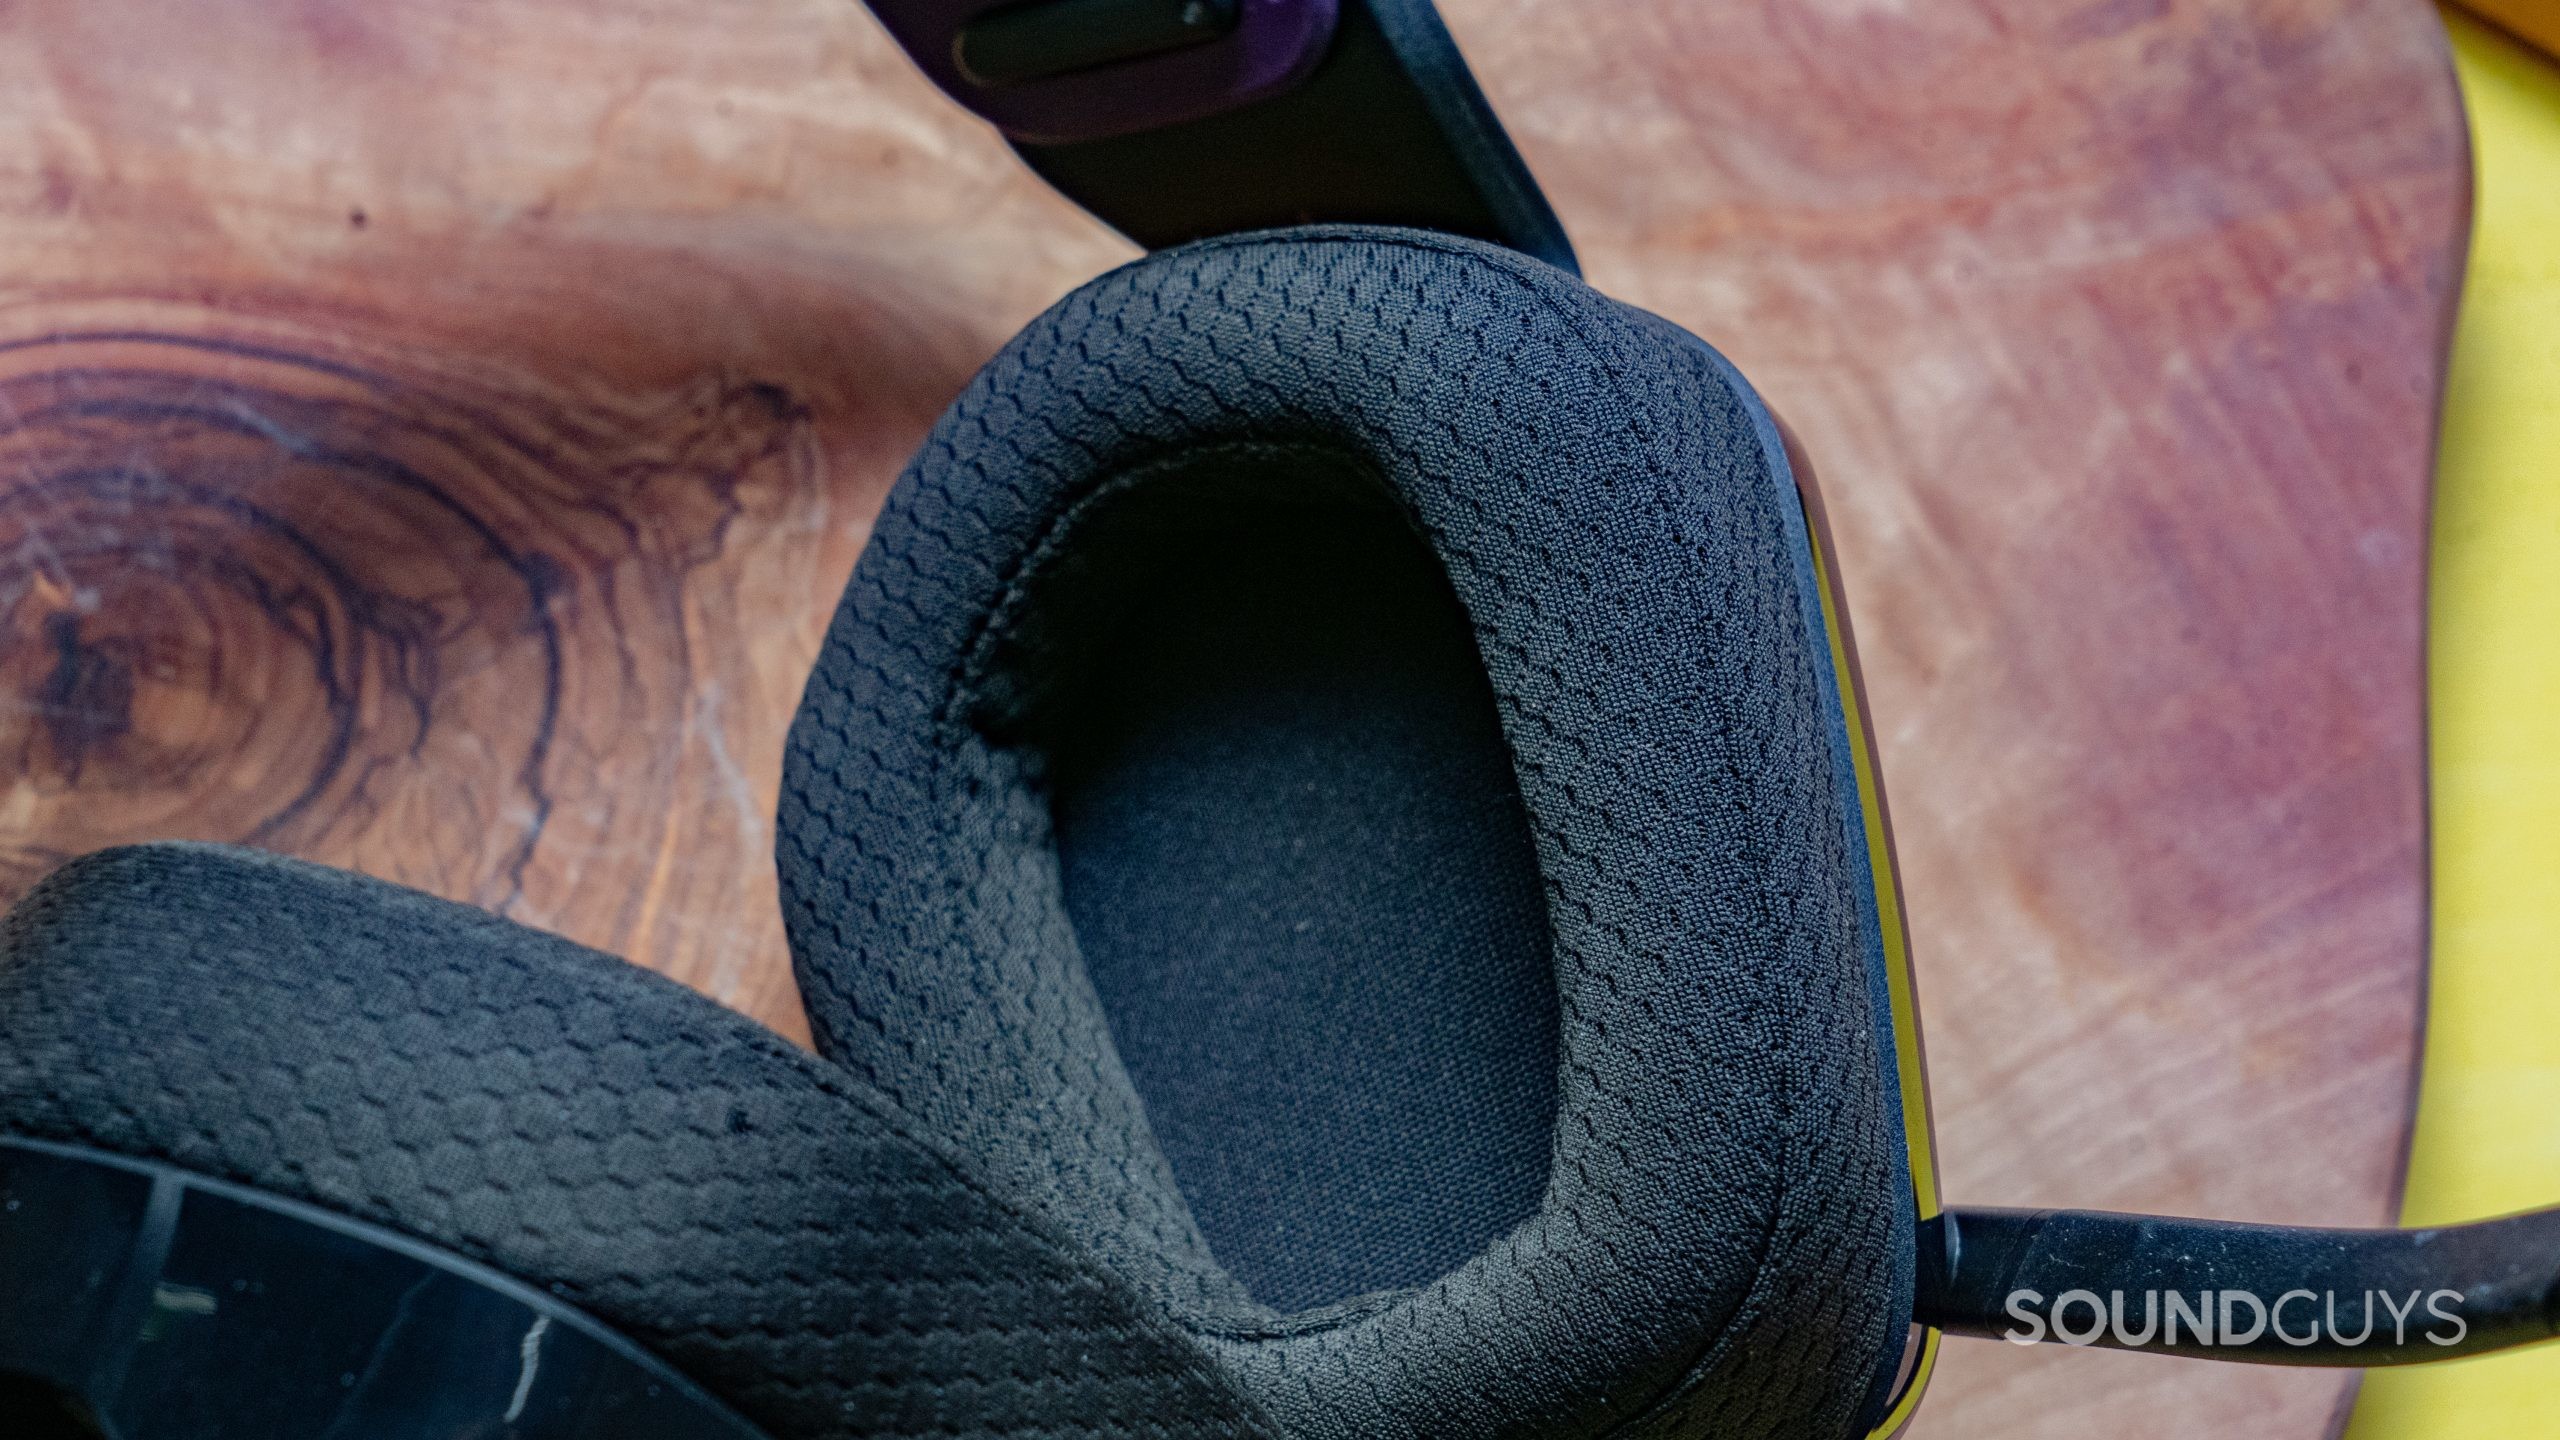 The Logitech G335 ear cup interior on top of a wooden surface.